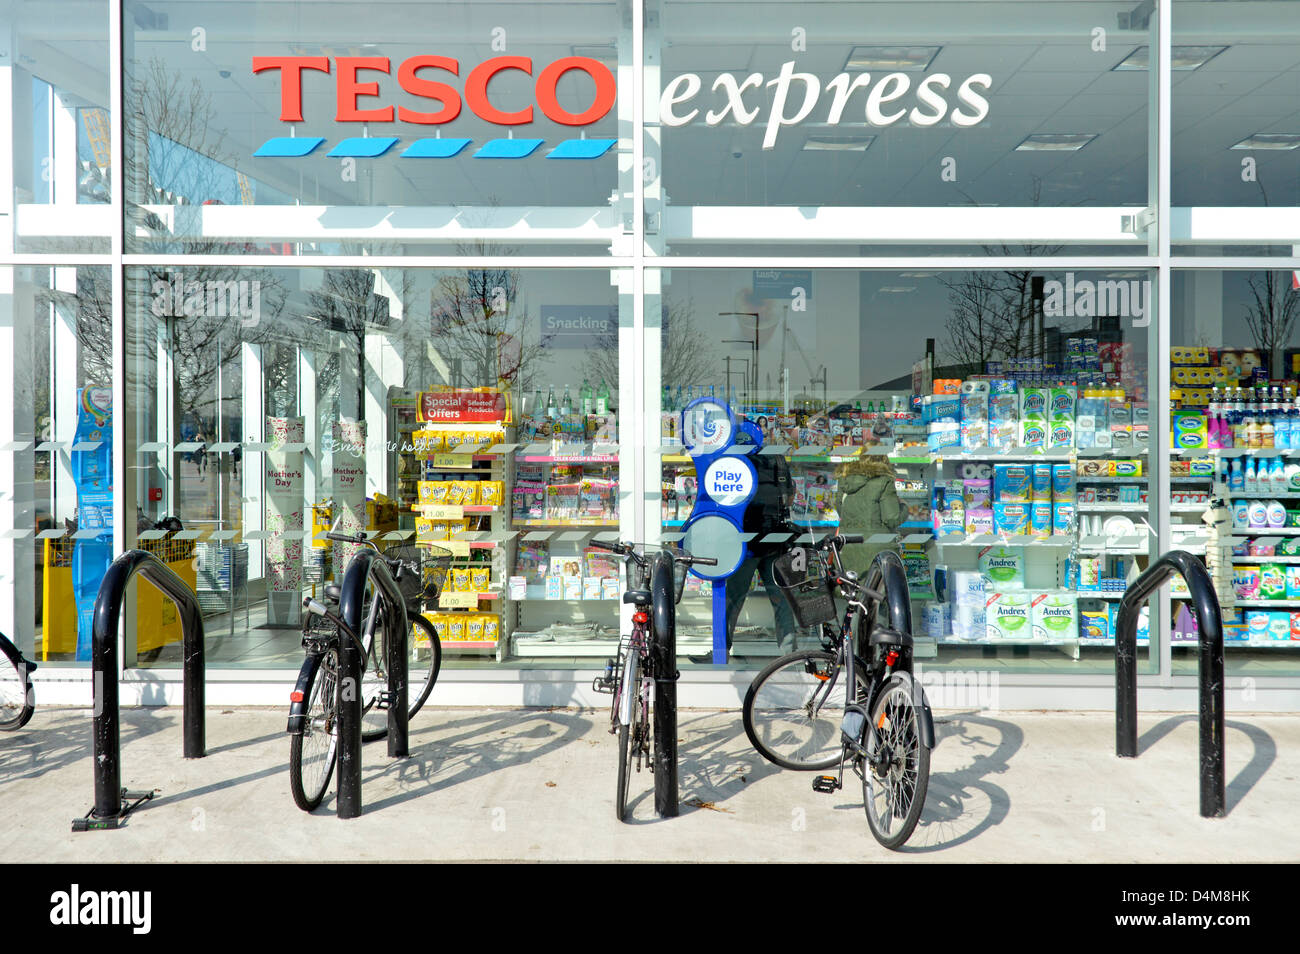 Bike racks outside convenience store window & view into tesco express grocery food drink supermarket retail business North Greenwich London England UK Stock Photo